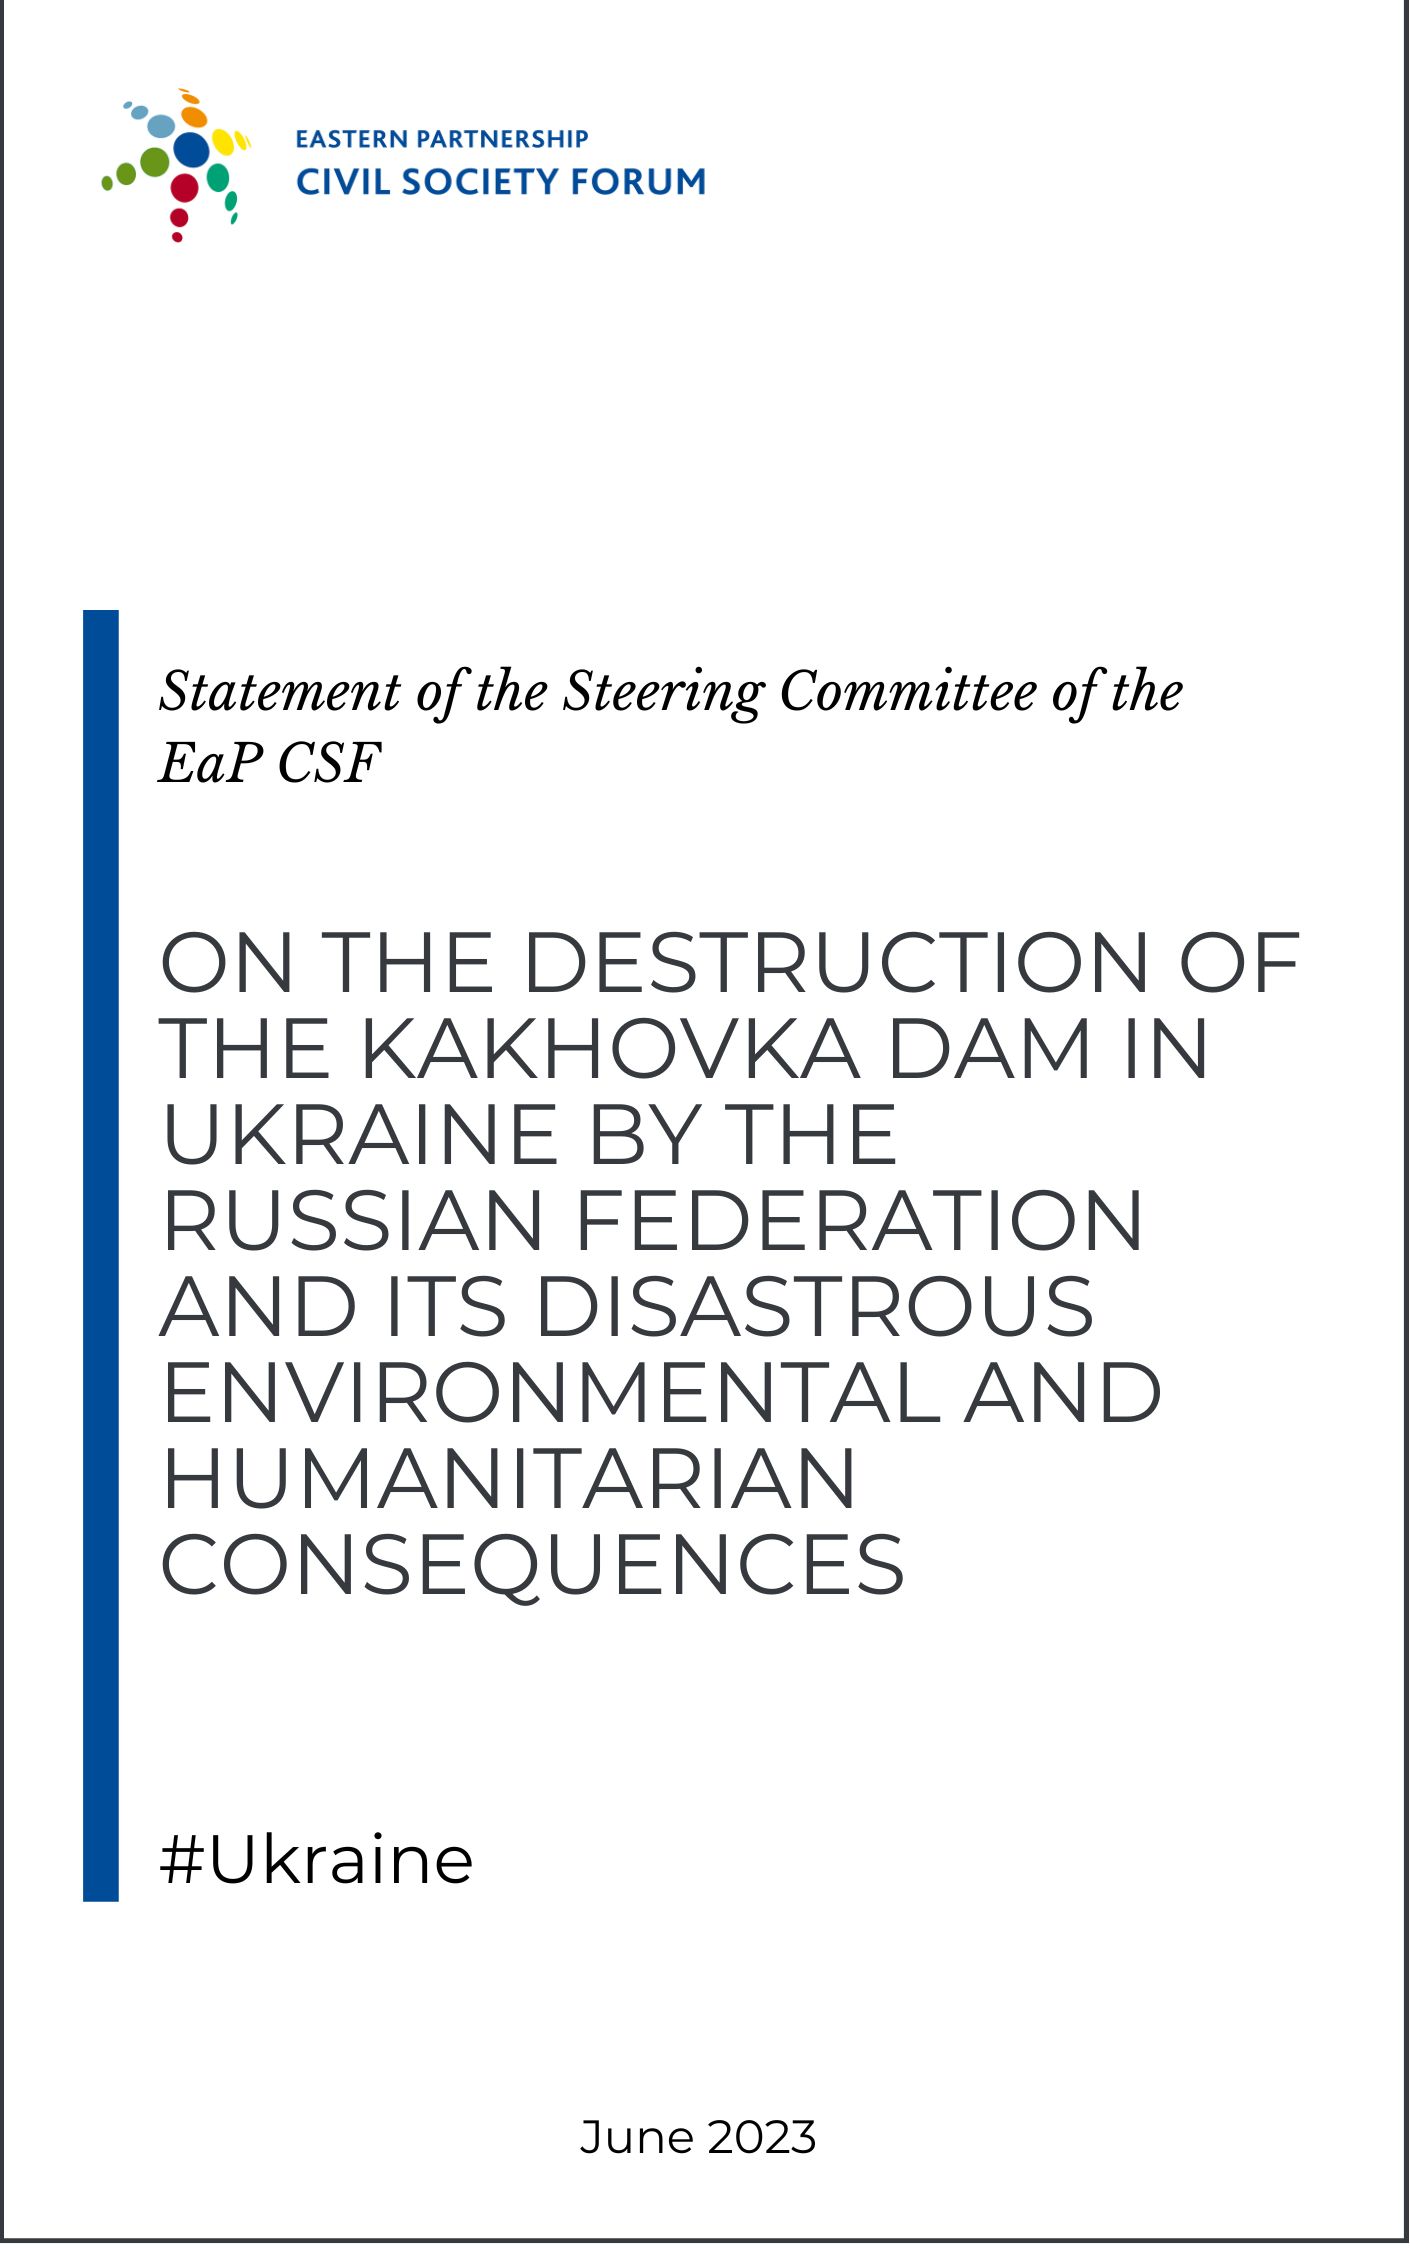 Statement by Steering Committee of the Eastern Partnership Civil Society Forum on the Destruction of the Kakhovka Dam in Ukraine